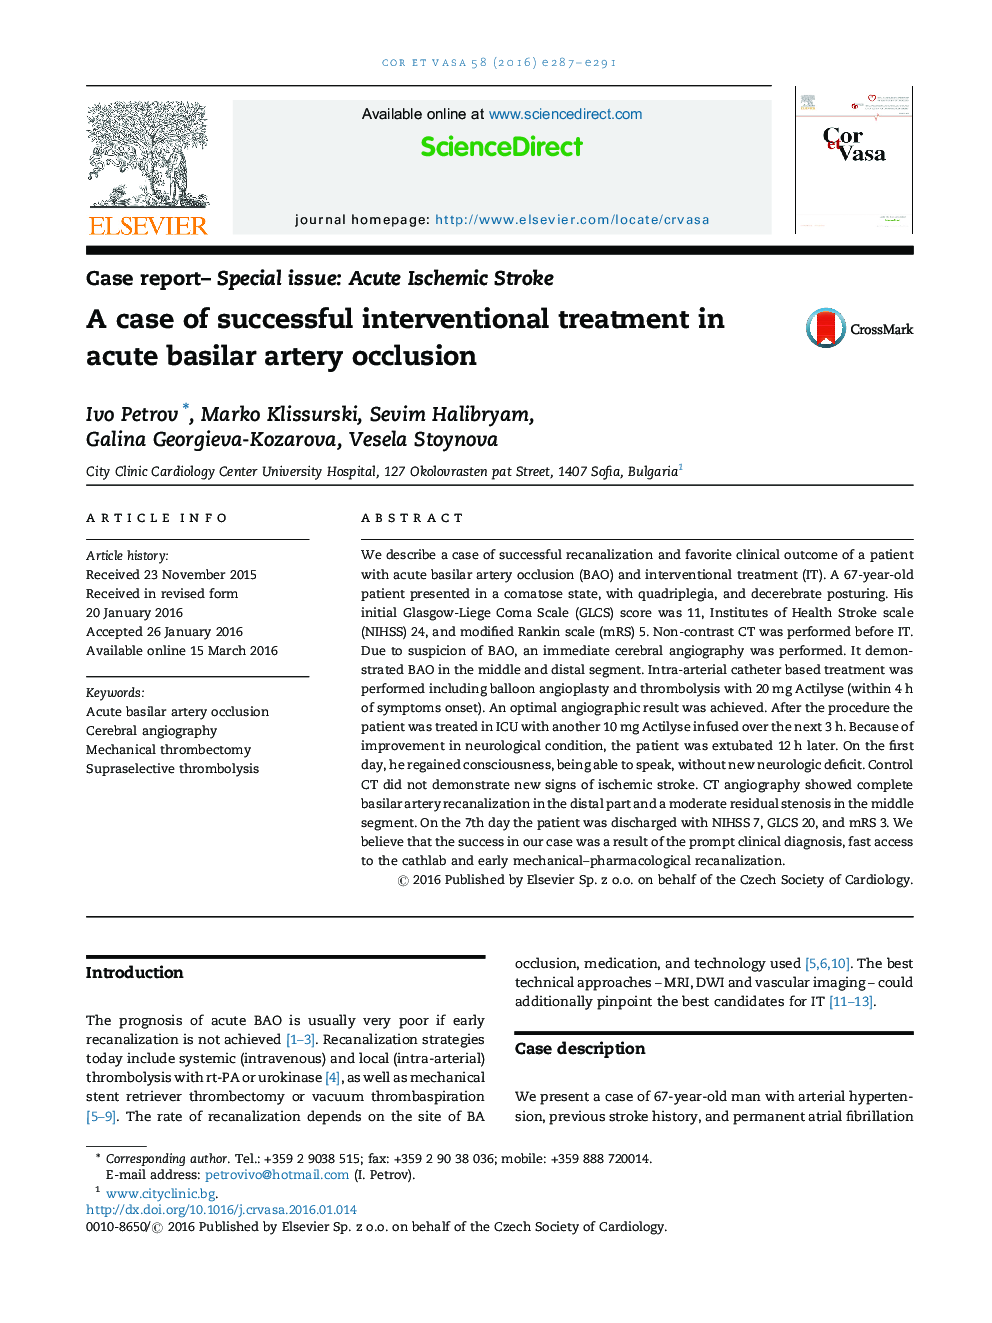 A case of successful interventional treatment in acute basilar artery occlusion